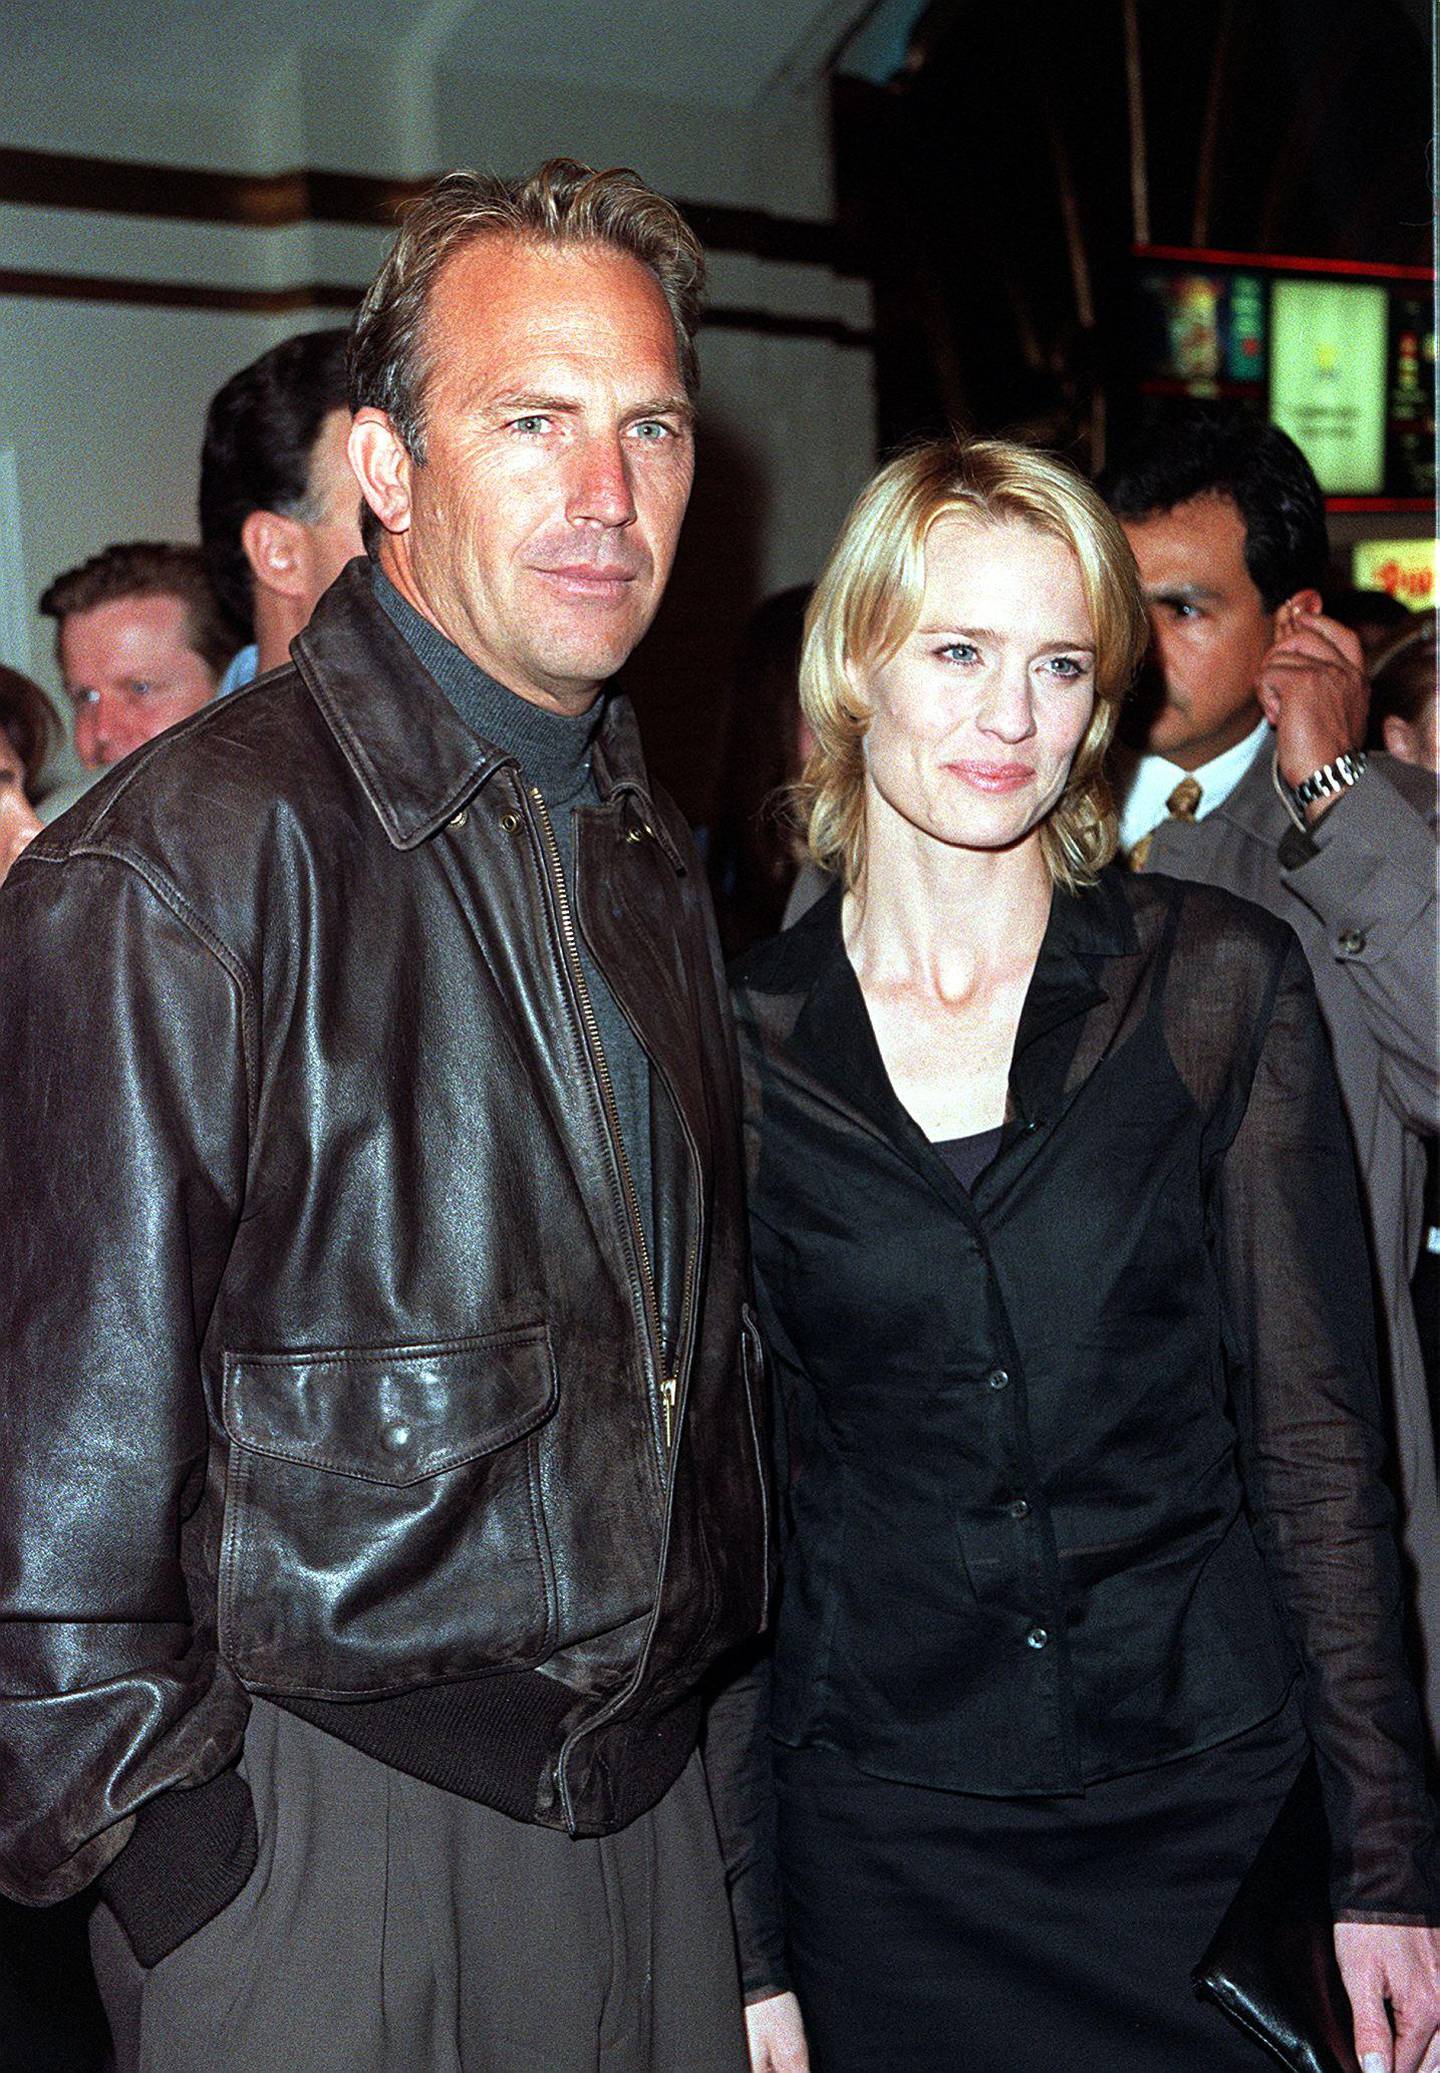 
US actor Kevin Costner(L) and actress Robin Wright Penn(R) arrive for the premiere of their new film "Message in A Bottle" 08 February in Los Angeles, CA. Costner and Wright Penn co-star in the romantic drama about a man living in solitude who rediscovers love. The film is directed by Luis Mandoki. AFP PHOTO  Vince BUCCI